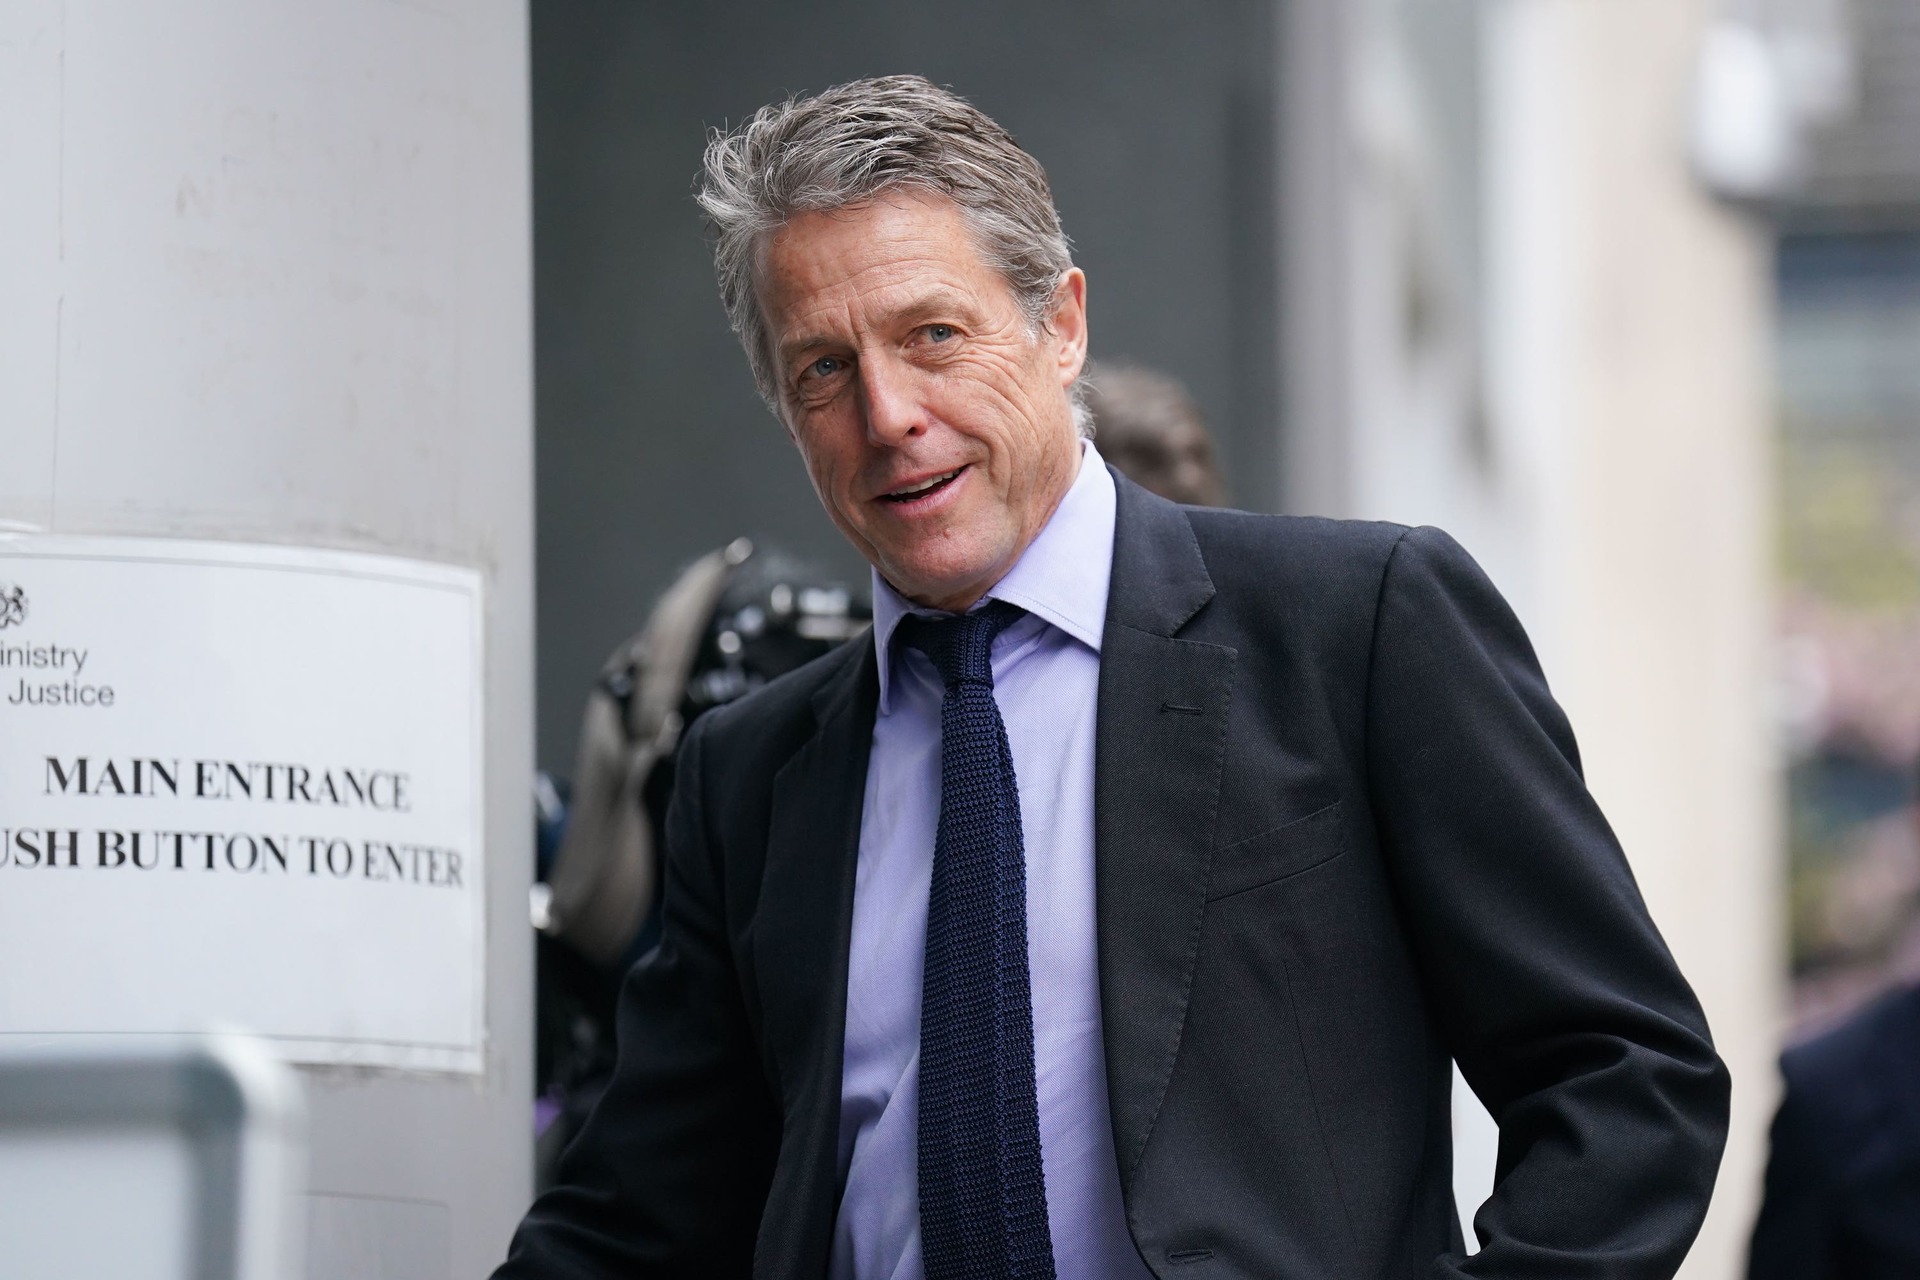 Hugh Grant is also bringing a case against the publisher.